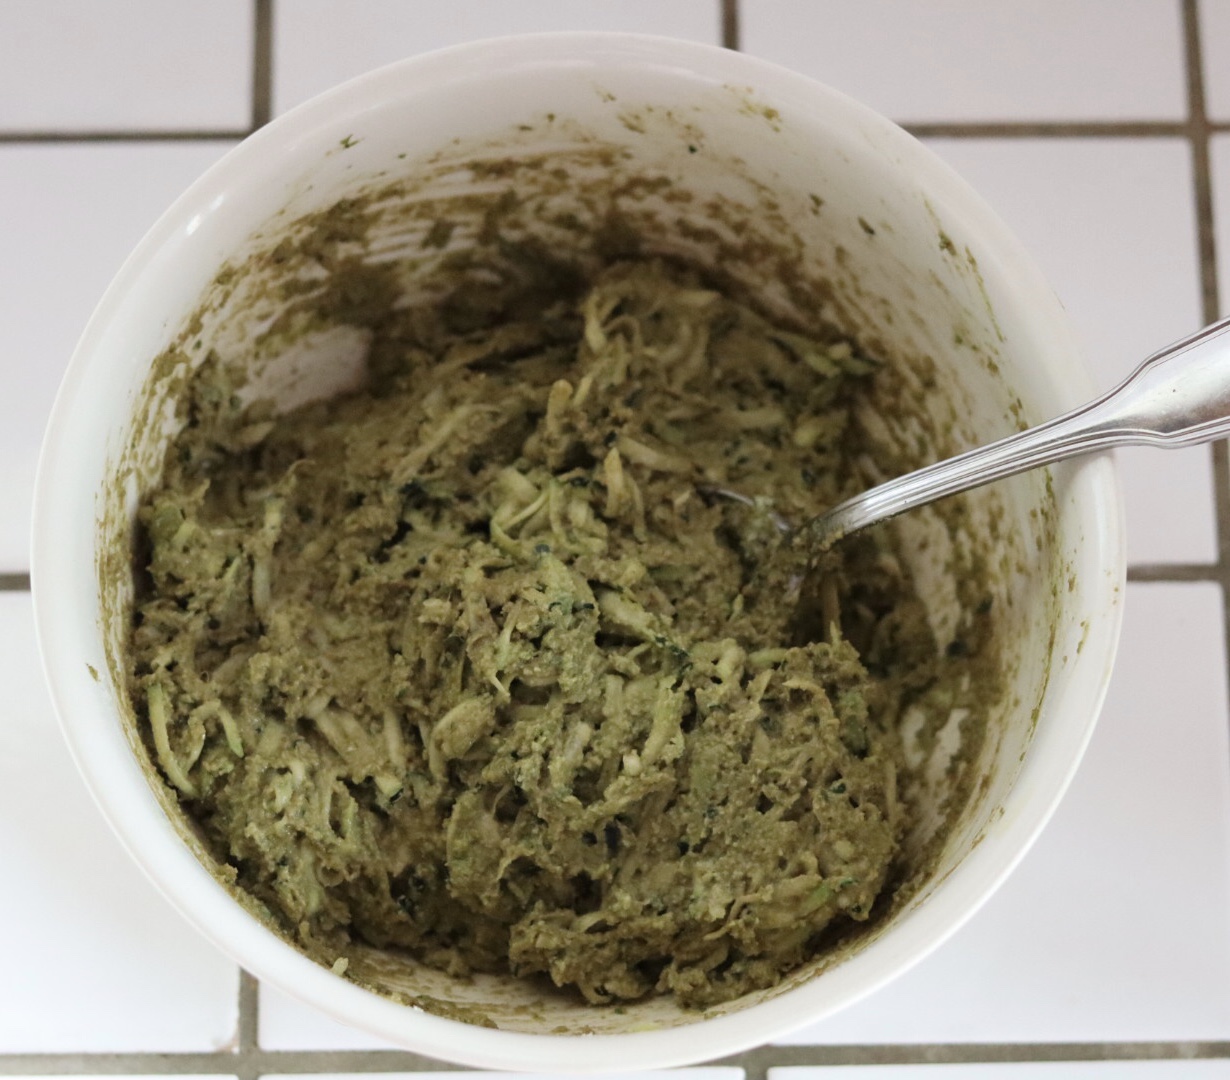 zucchini and pesto muffins batter in a white bowl on a kitchen counter